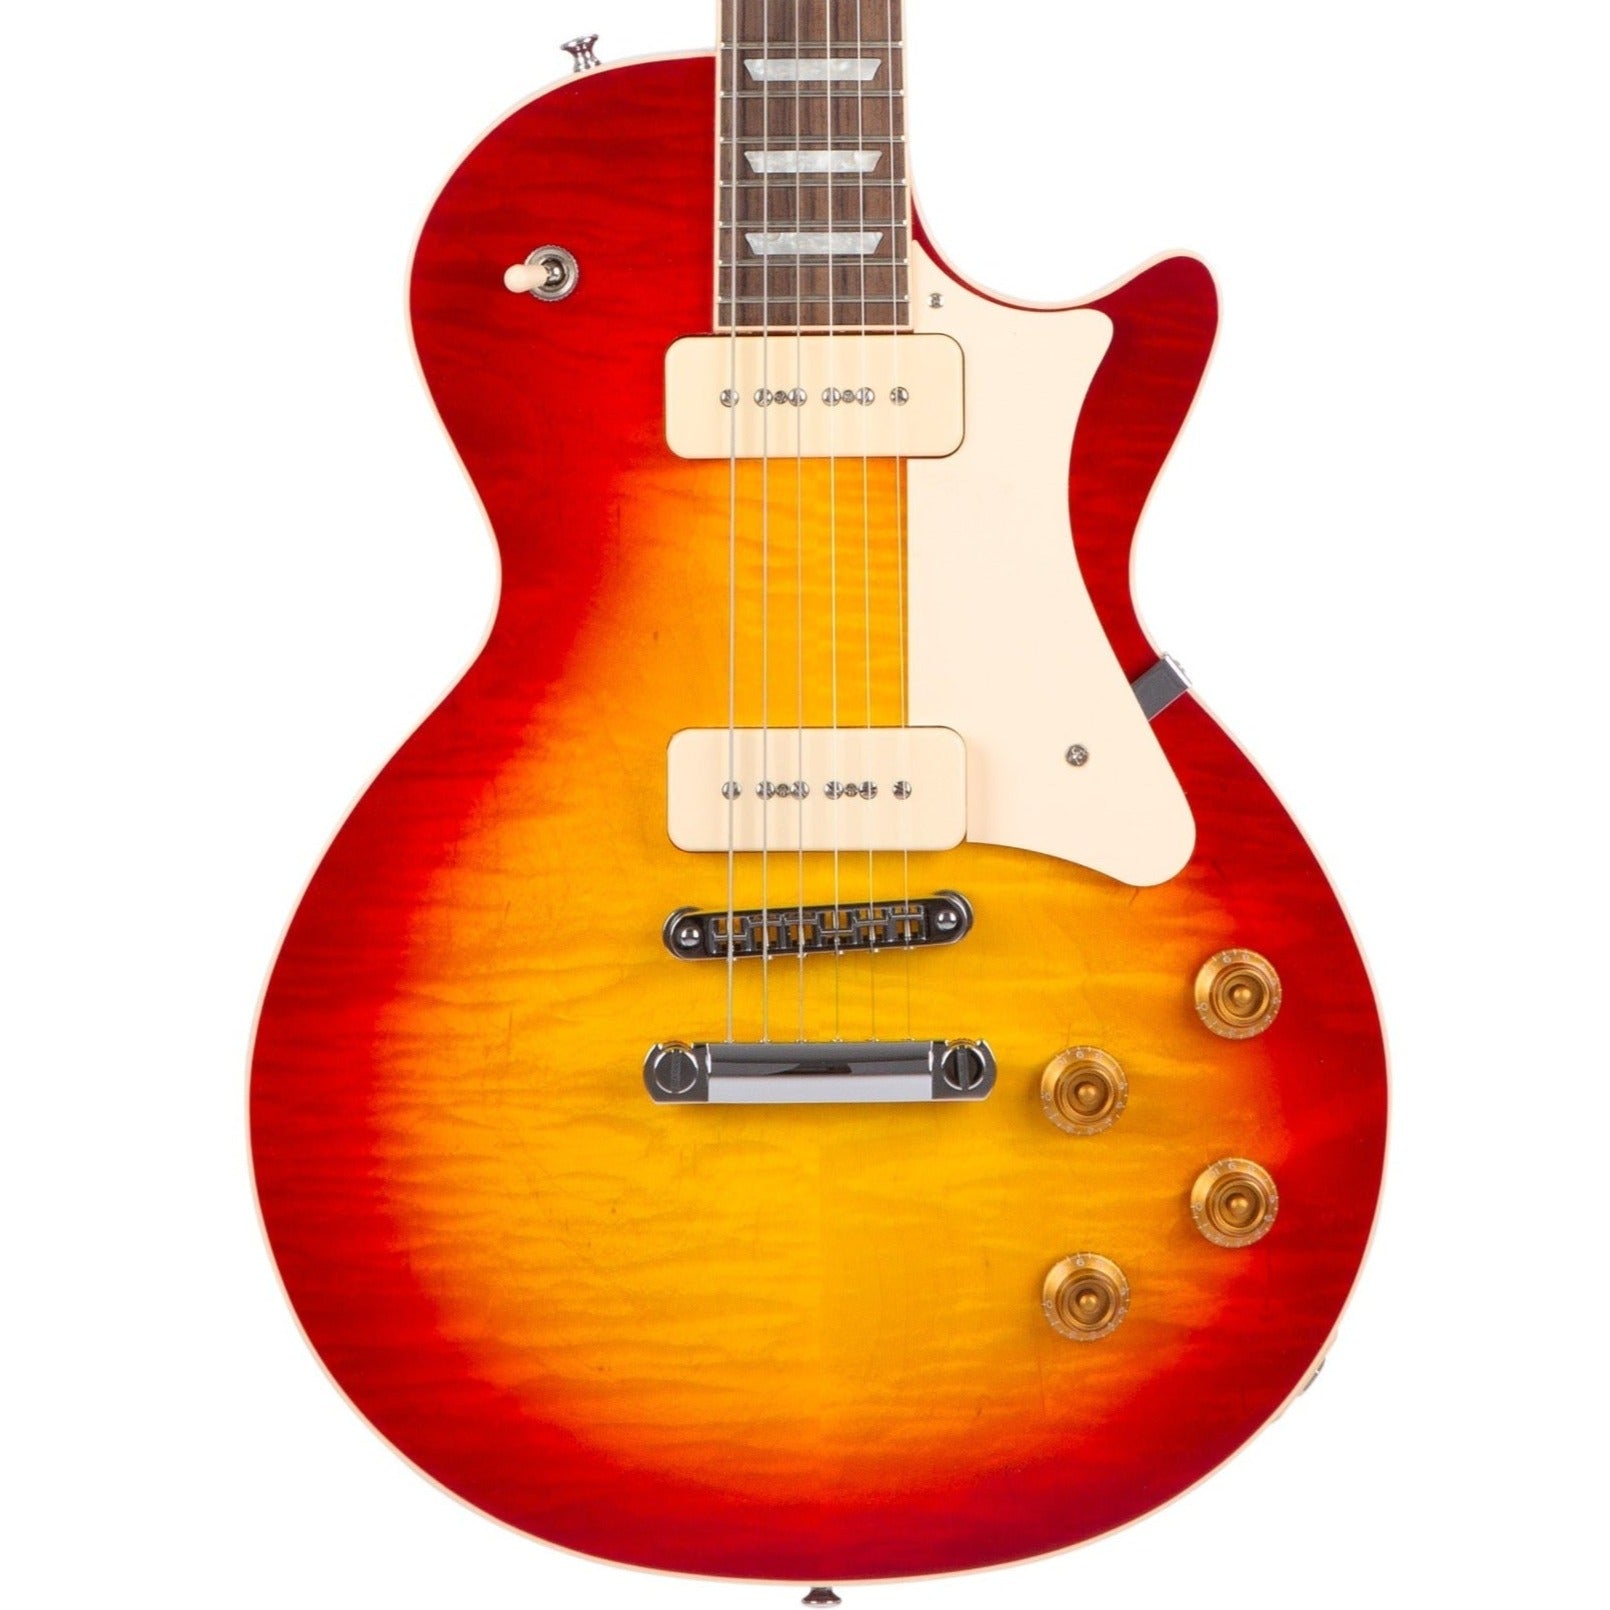 Heritage Standard Collection H-150 P90 Electric Guitar with Case, Vintage Cherry Sunburst | Zoso Music Sdn Bhd